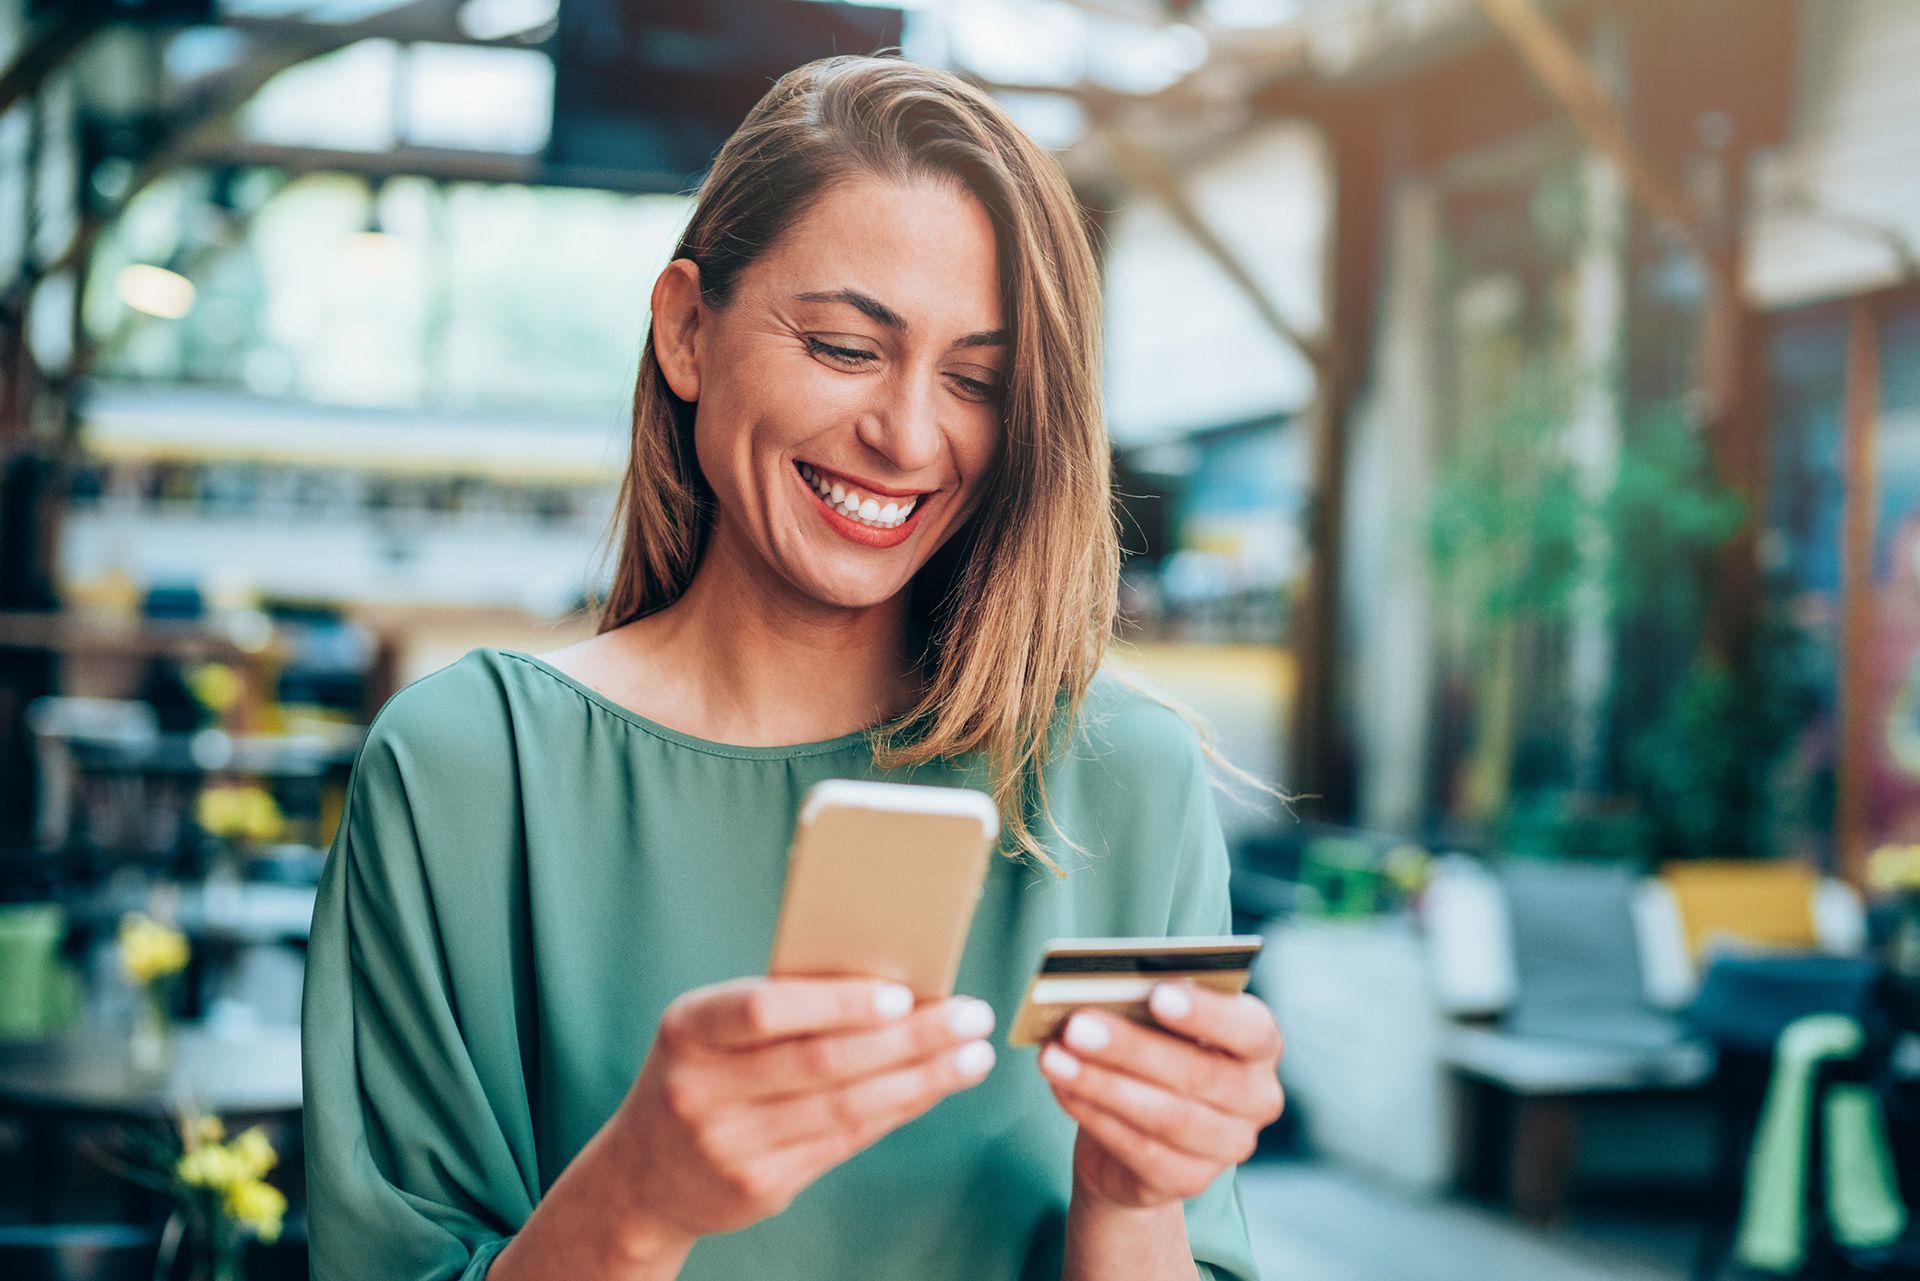 A woman is smiling while holding a credit card and a cell phone